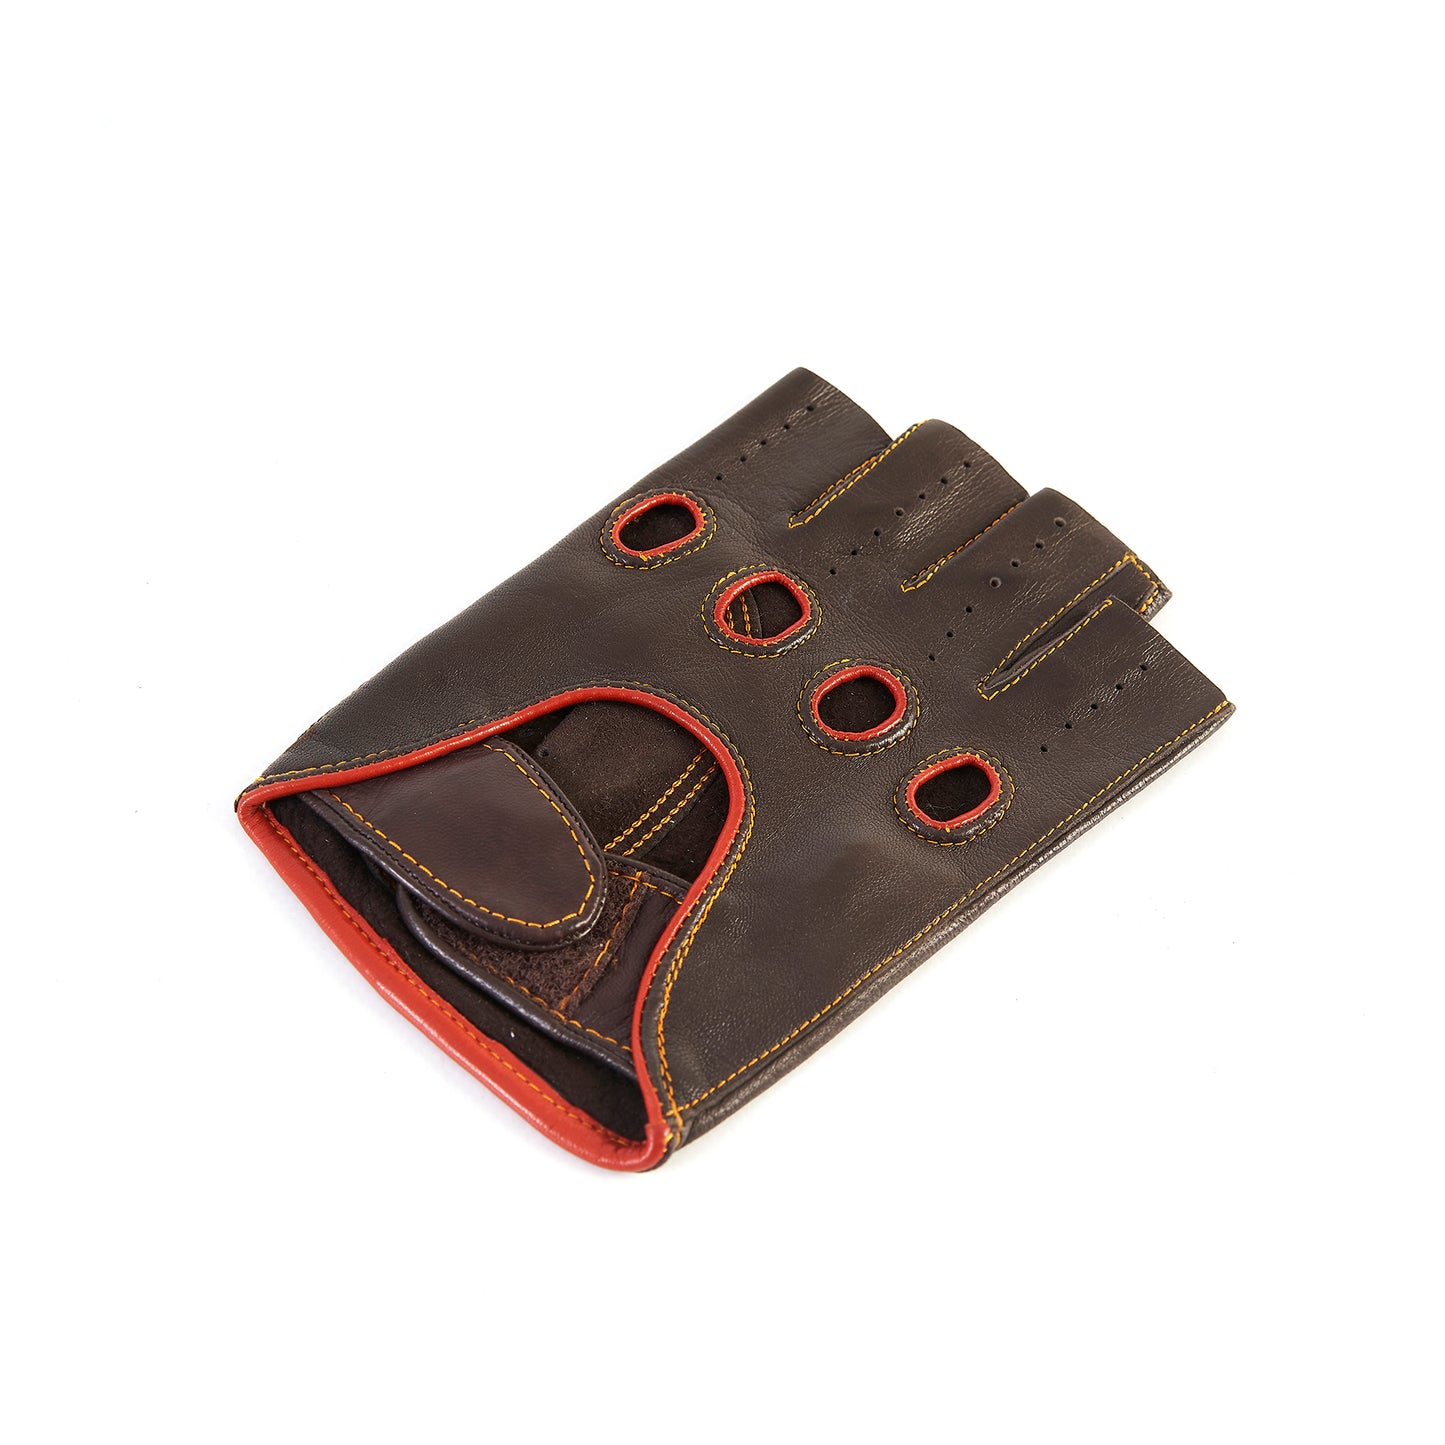 Men's brown leather half fingers driving gloves with strap closure